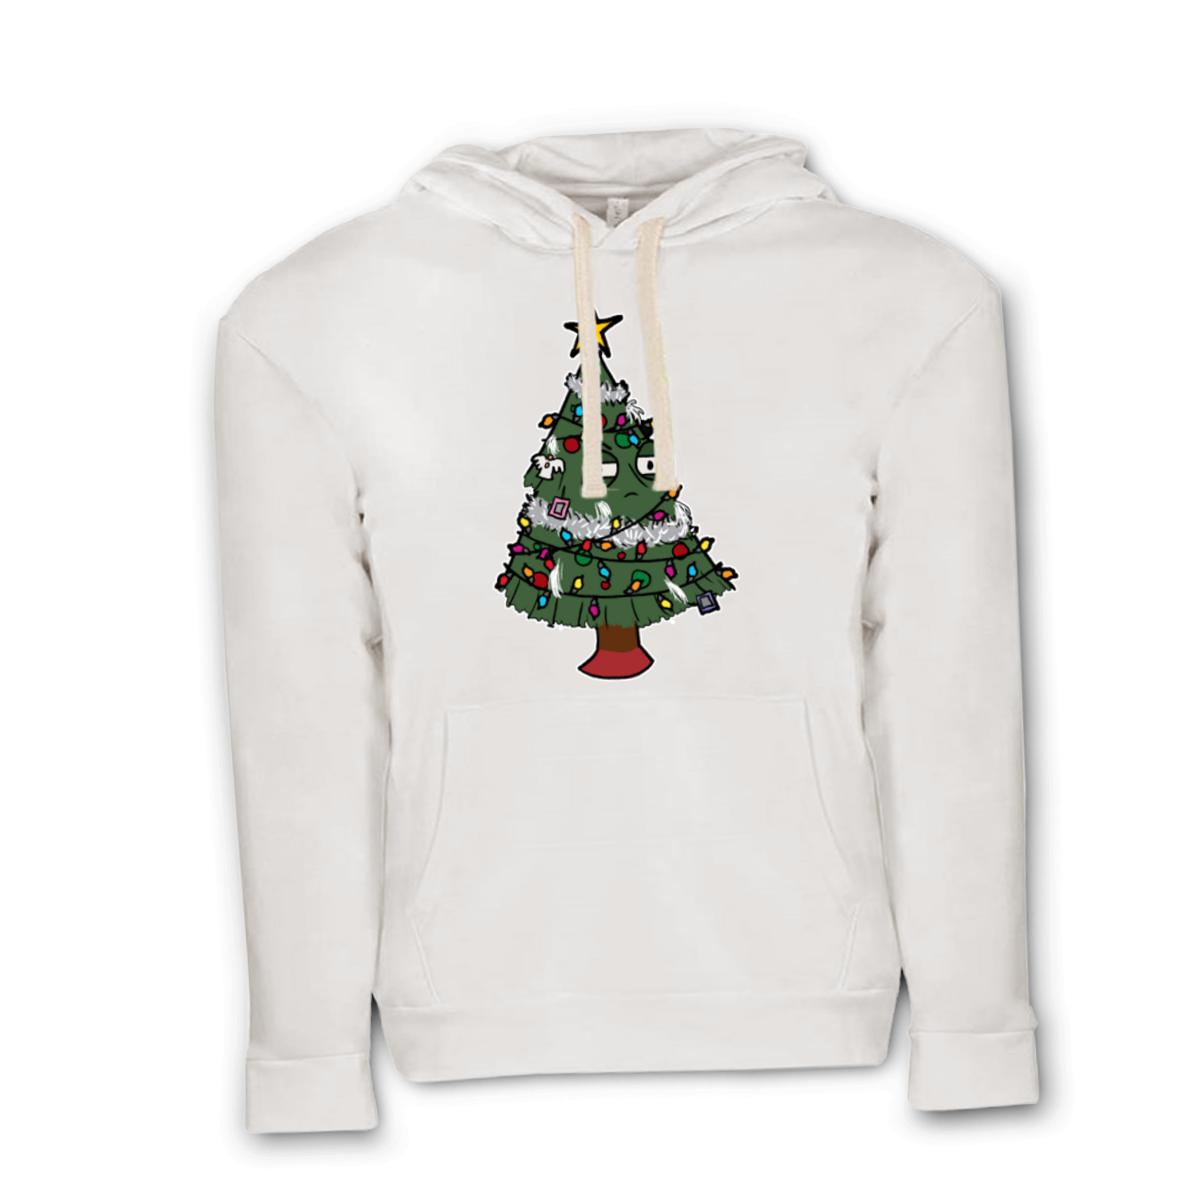 Gaudy Christmas Tree Unisex Pullover Hoodie Small white